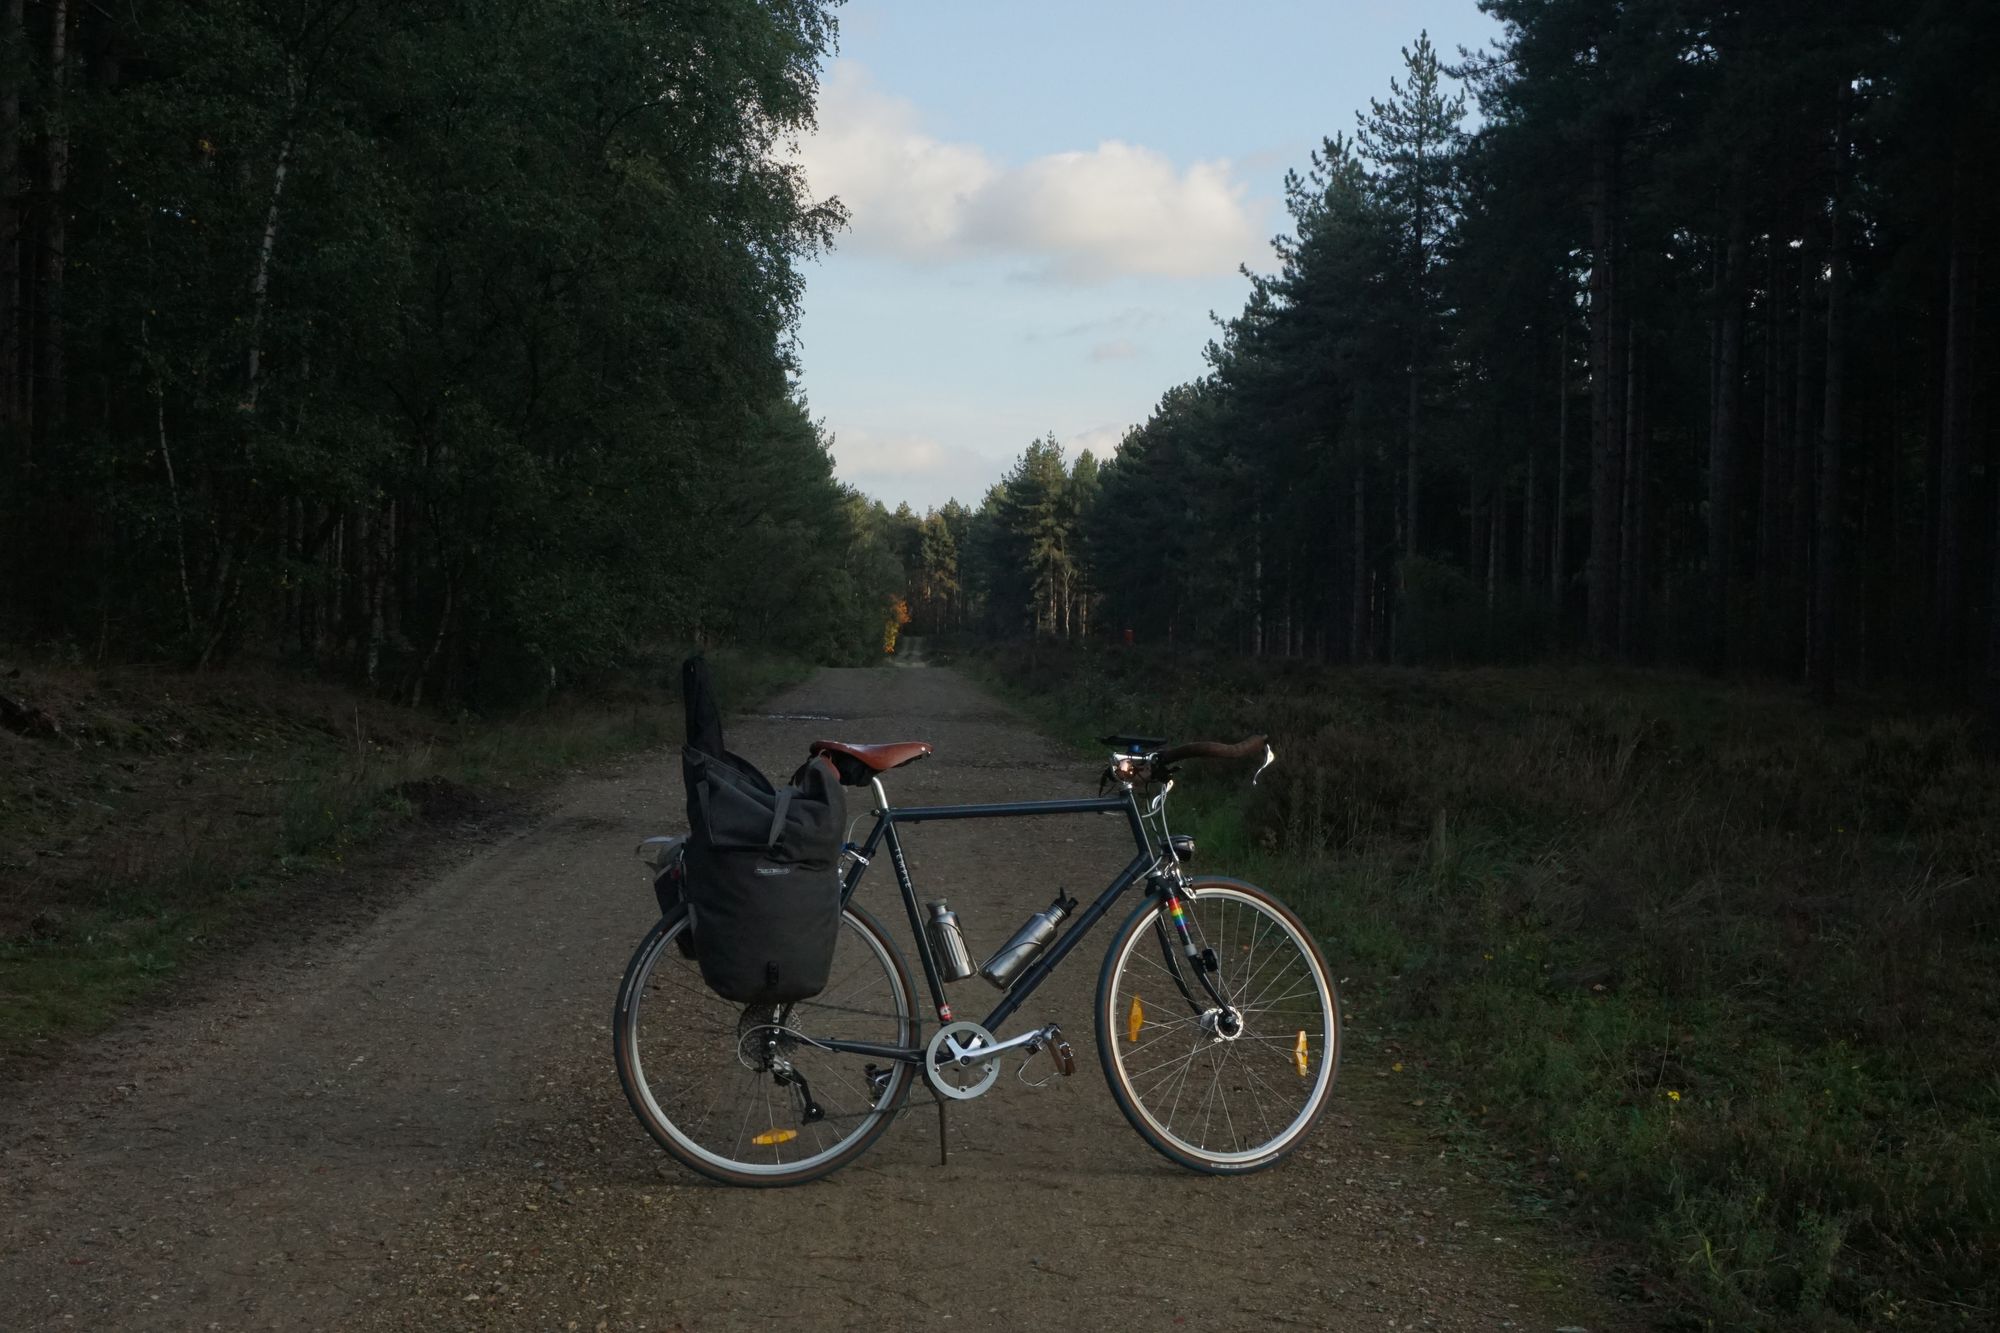 Jonathan's touring bicycle on a deserted tree-lined road with an unsealed (gravel) surface